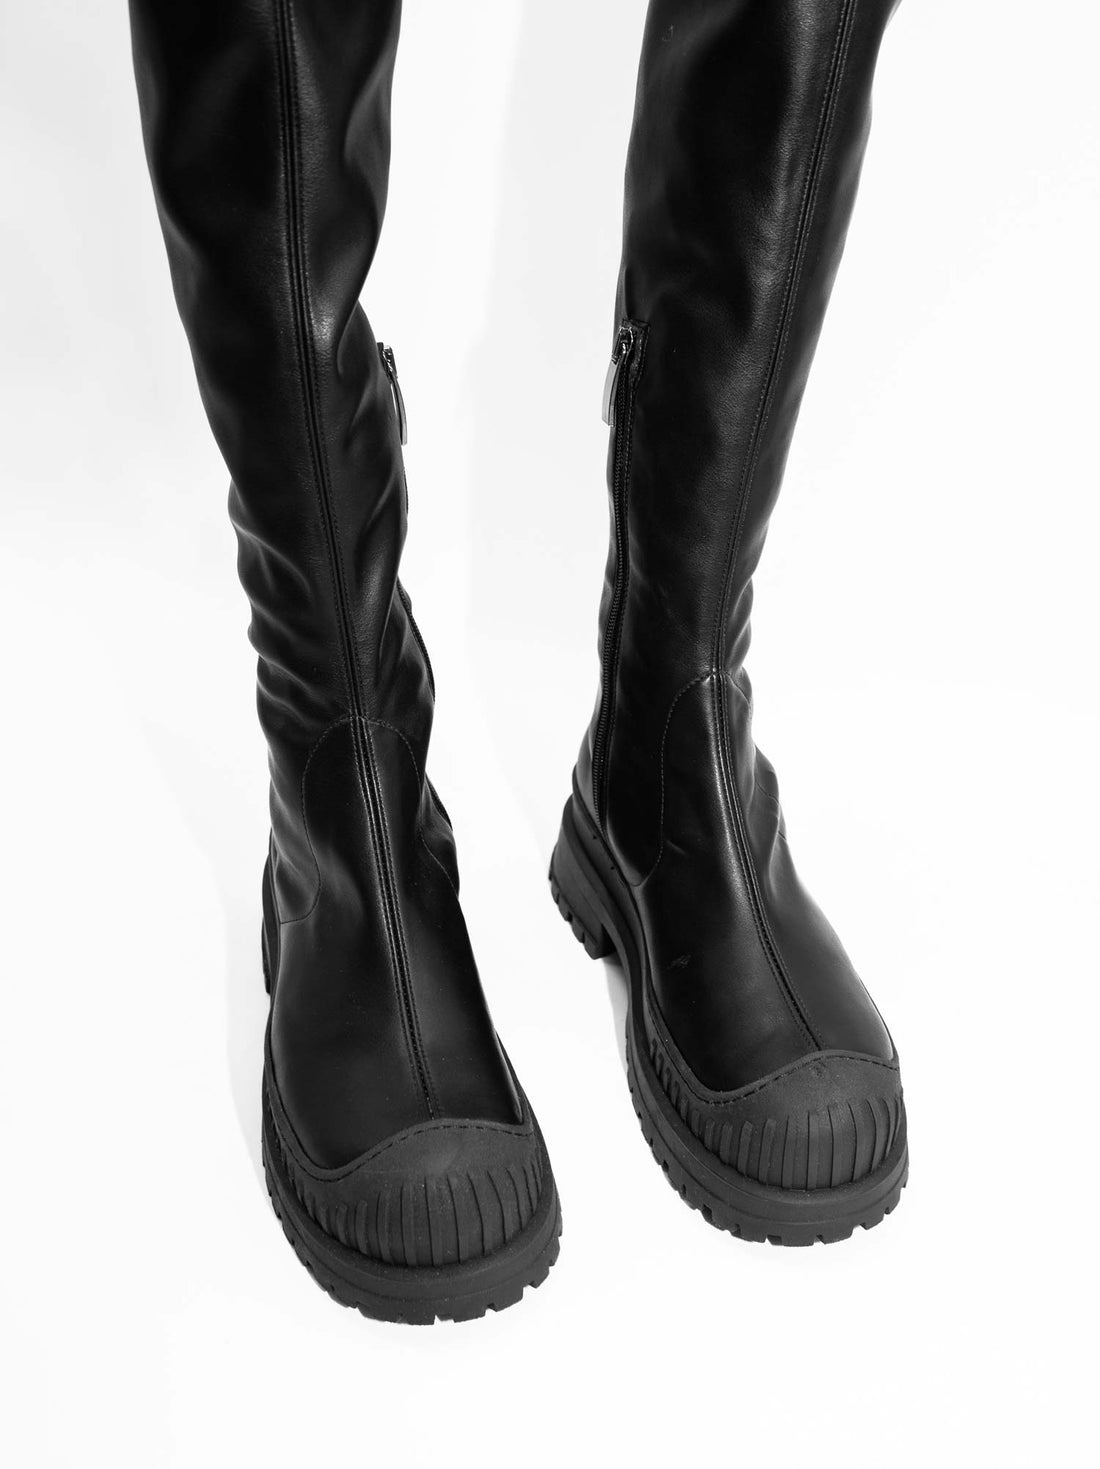 TY54 FAUX-LEATHER TALL BOOTS